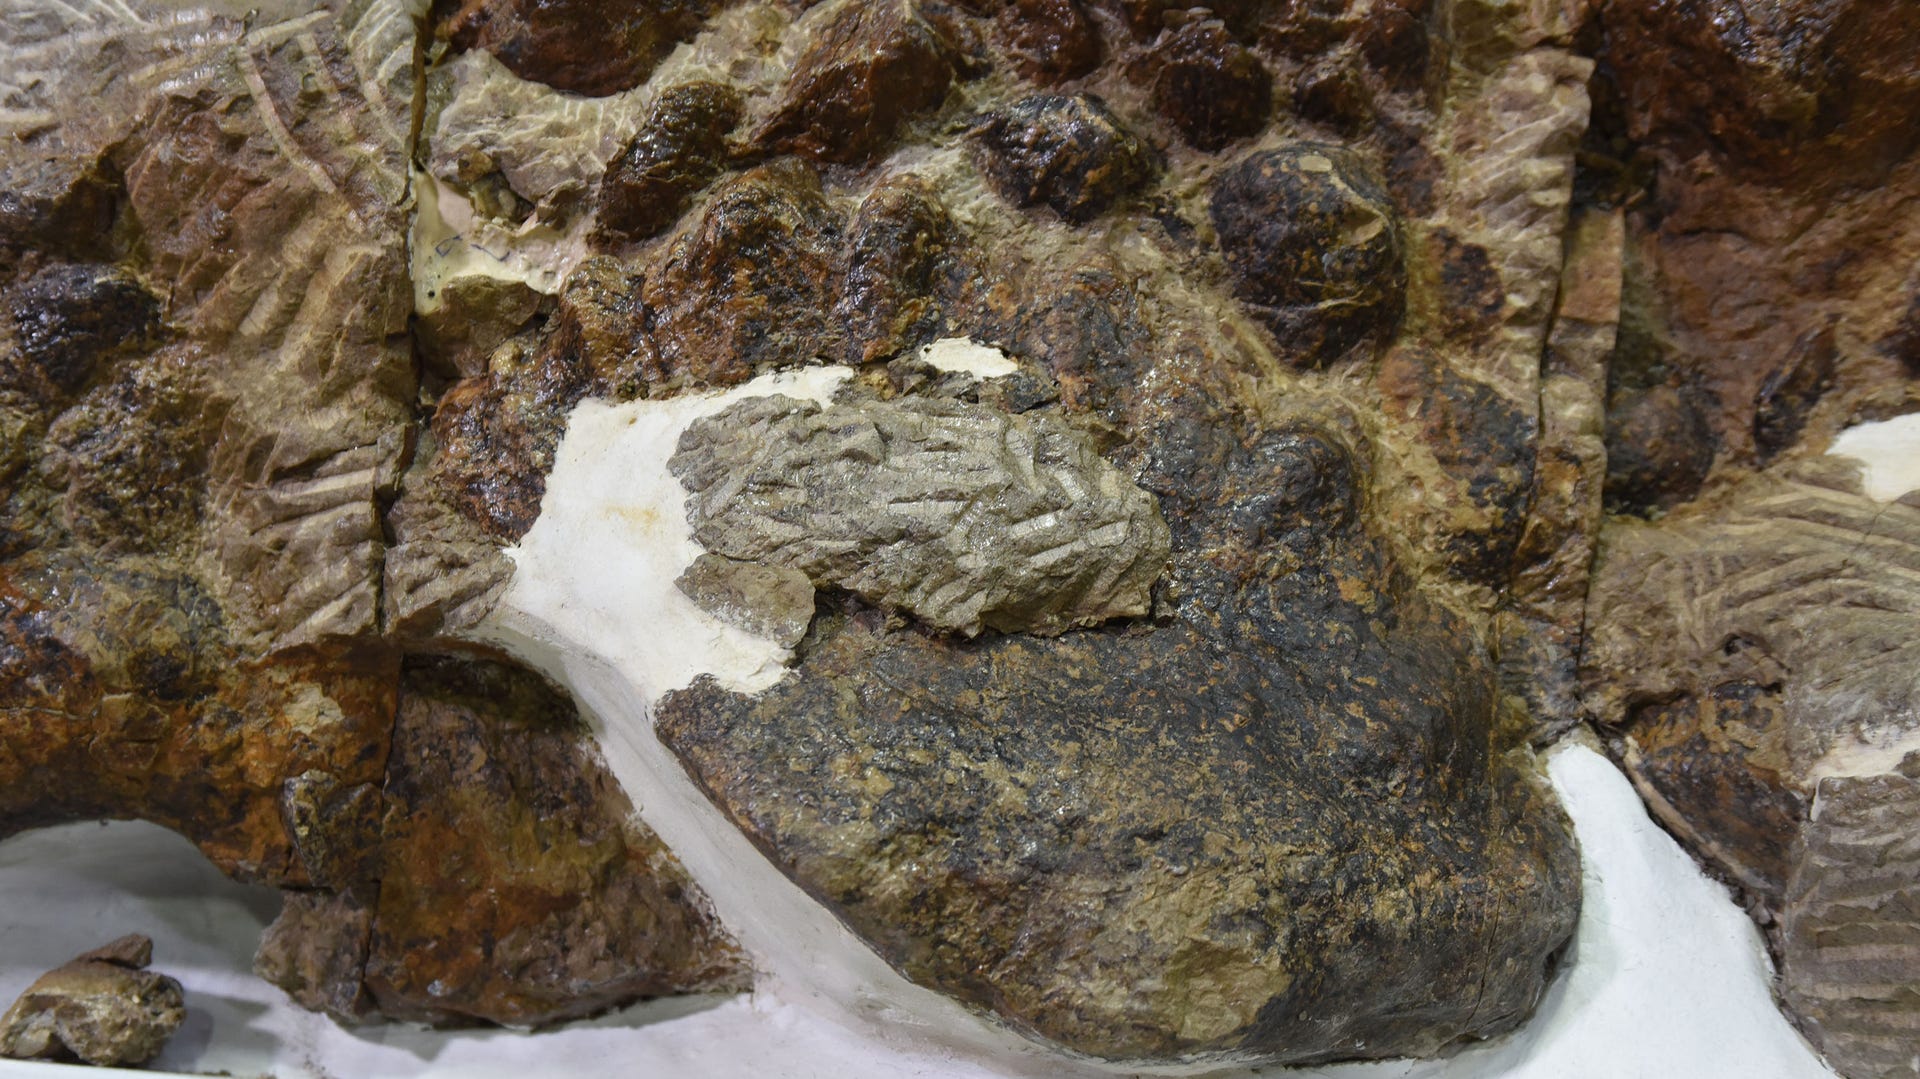 Brown fossilized remains of Zuul ankylosaur shows a blunted spike in its body armor.